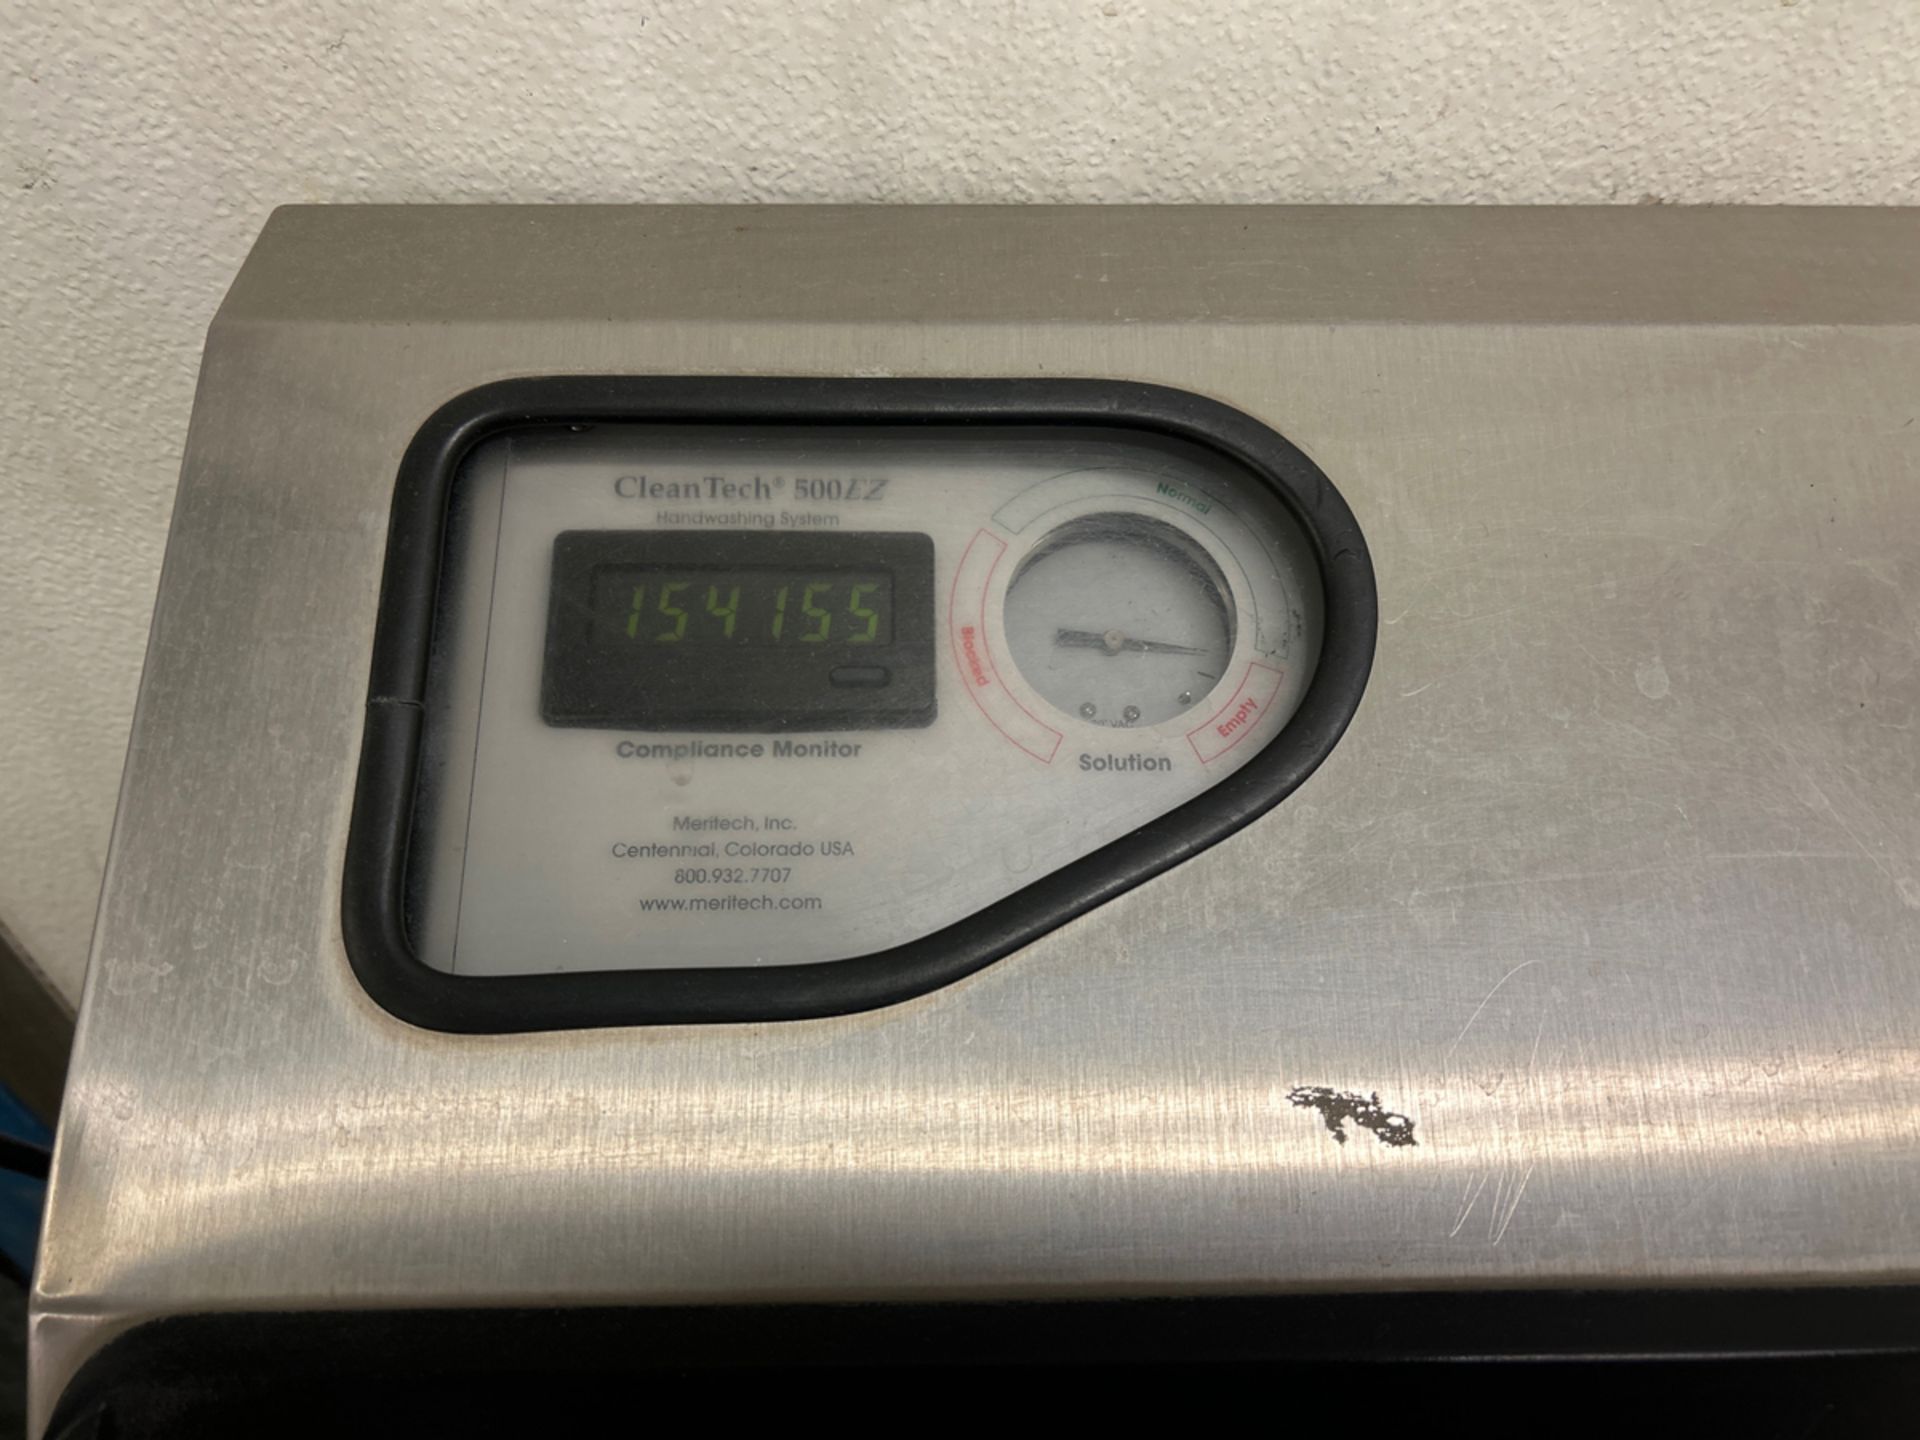 SINGLE-BAY, WALL-MOUNT CLEANTECH 500EZ AUTOMATED HANDWASHING STATION - Image 3 of 3